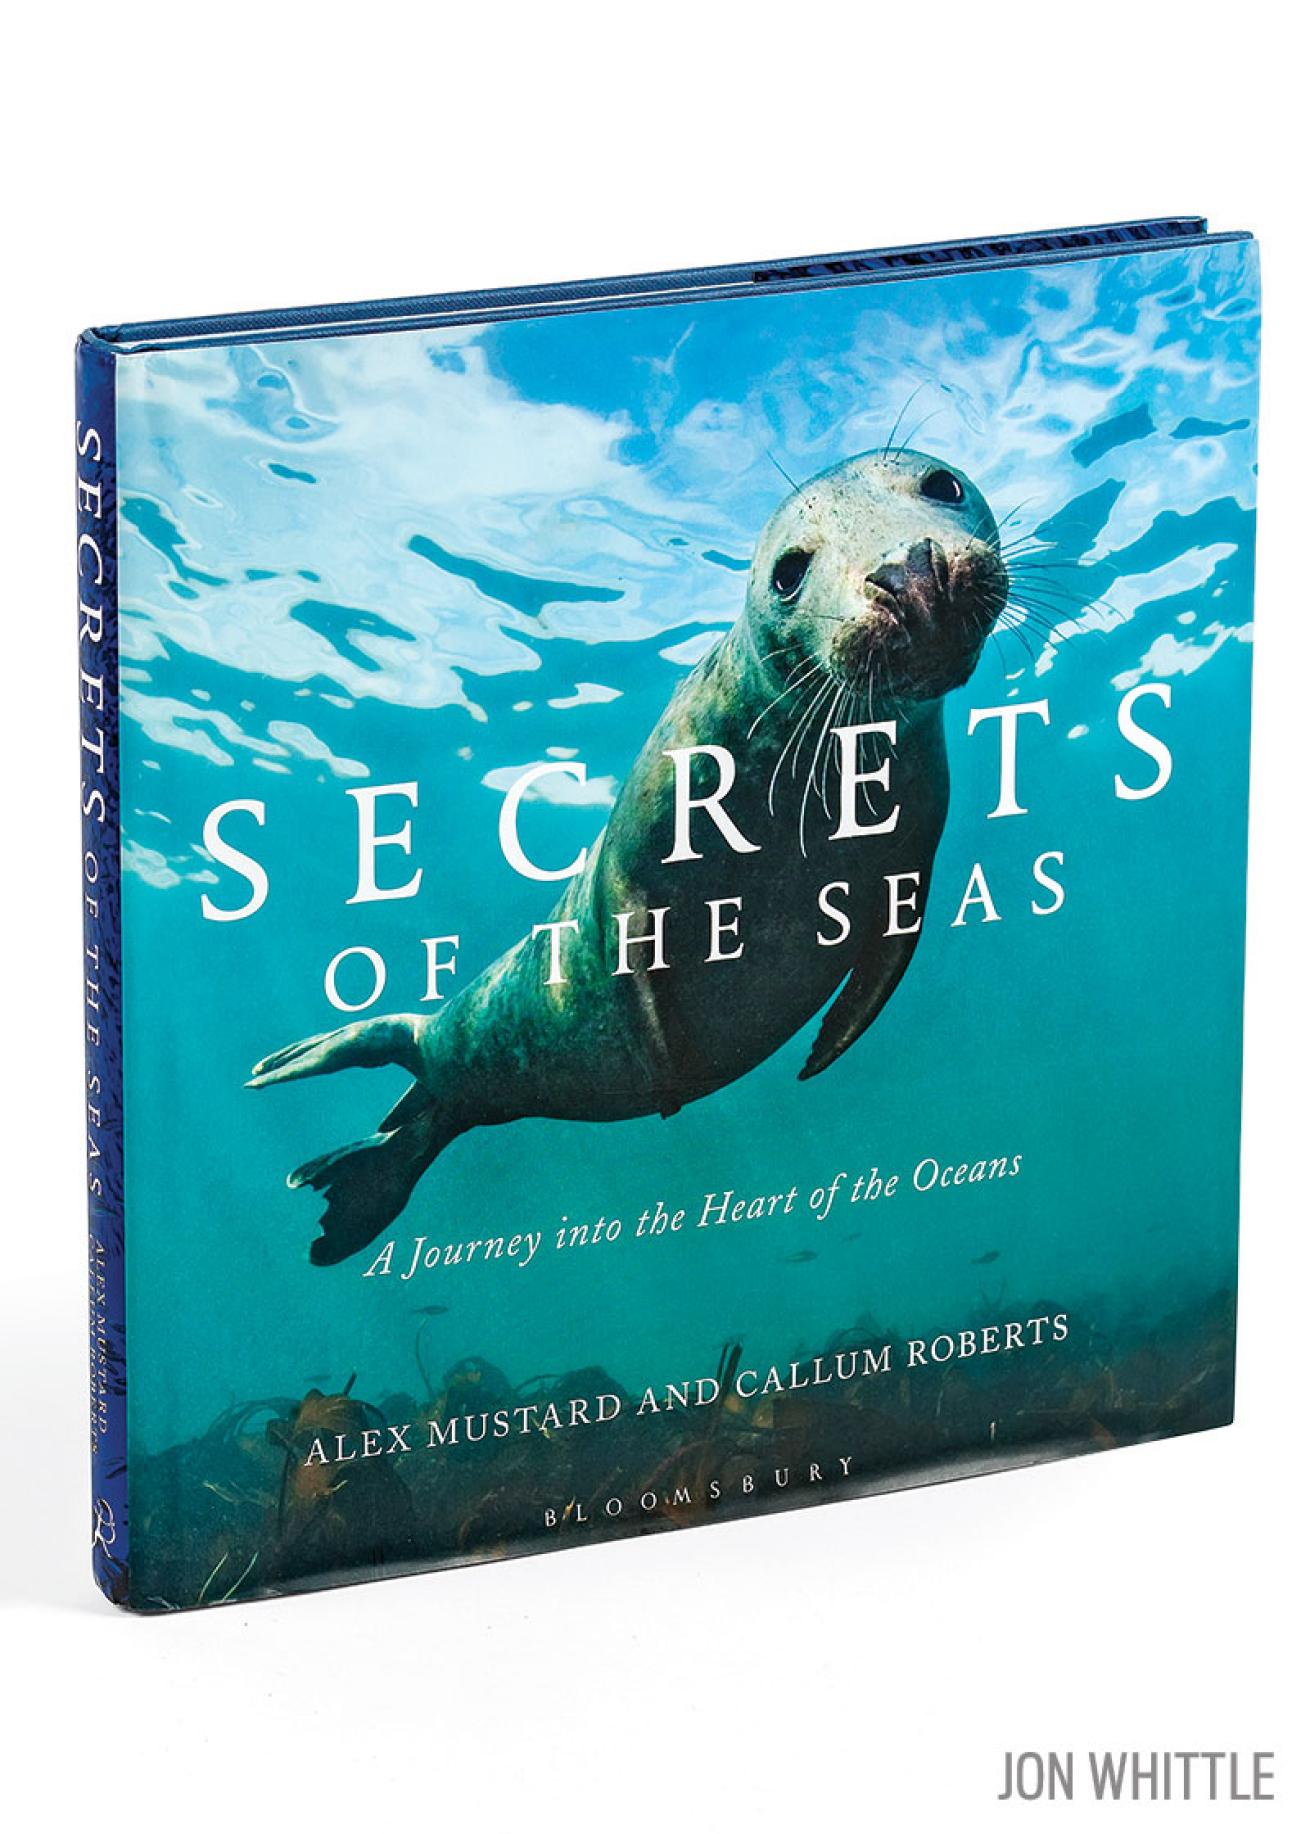 Secrets of the Seas: A Journey into the Heart of the Oceans